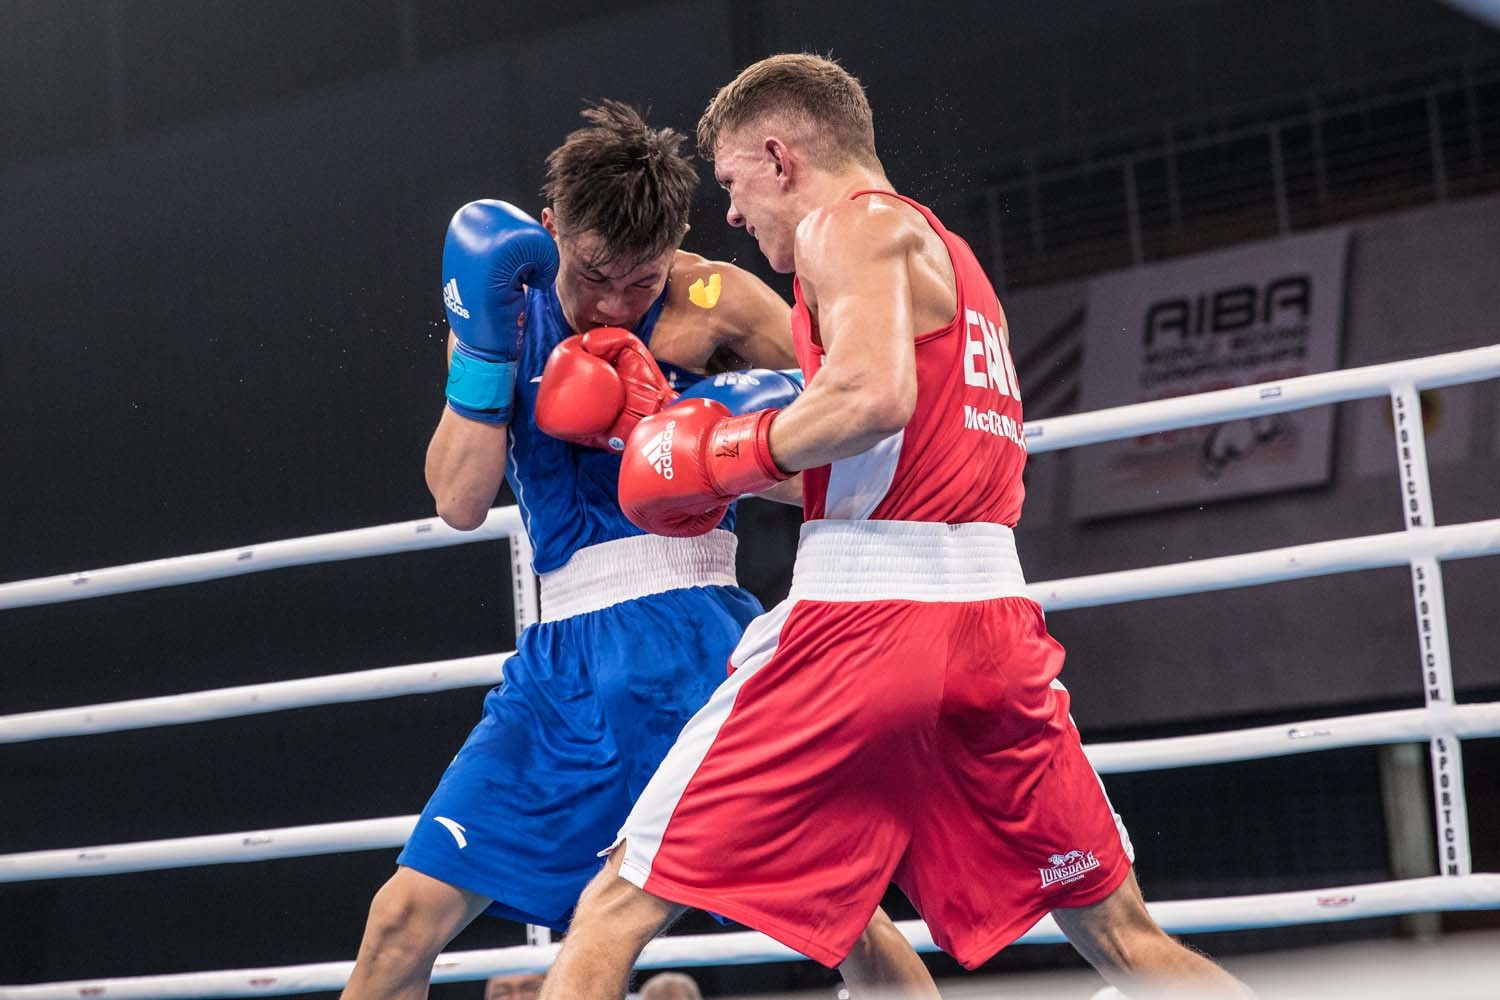 England's Luke McCormack impressed in the same weight division ©AIBA